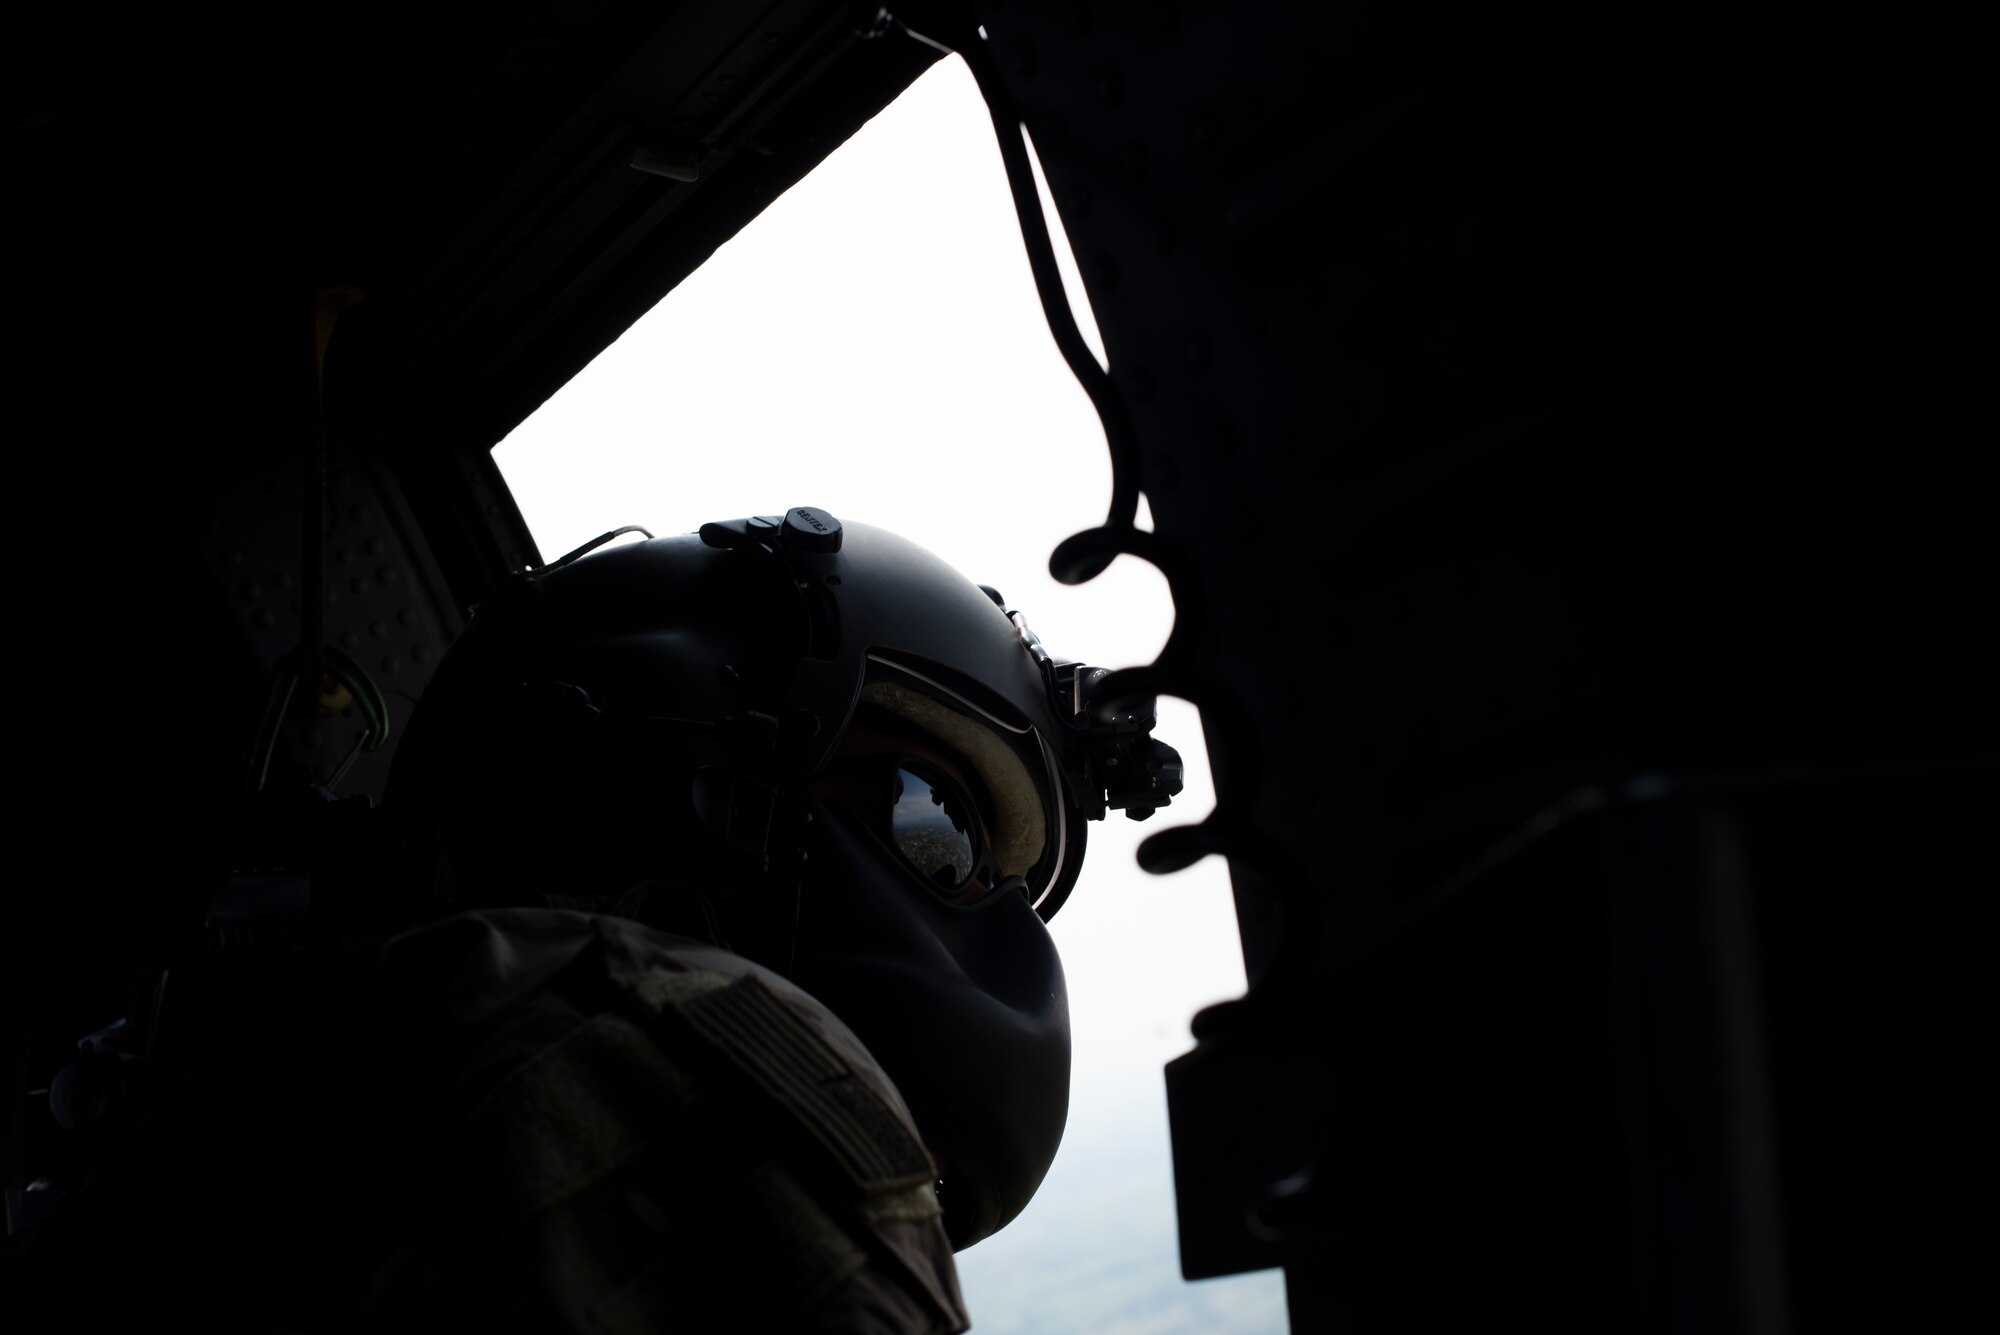 An Airman from the 56th Rescue Squadron looks out of an HH-60G Pave Hawk during Operation Porcupine over a military training area in Osoppo, Italy, June 30, 2020. Operation Porcupine is a combat search and rescue exercise requiring Aviano’s 510th Fighter Squadron, 56th and 57th Rescue Squadron, and 606th Air Control Squadron to work together to accomplish the mission.  (U.S. Air Force photo by Senior Airman Caleb House)